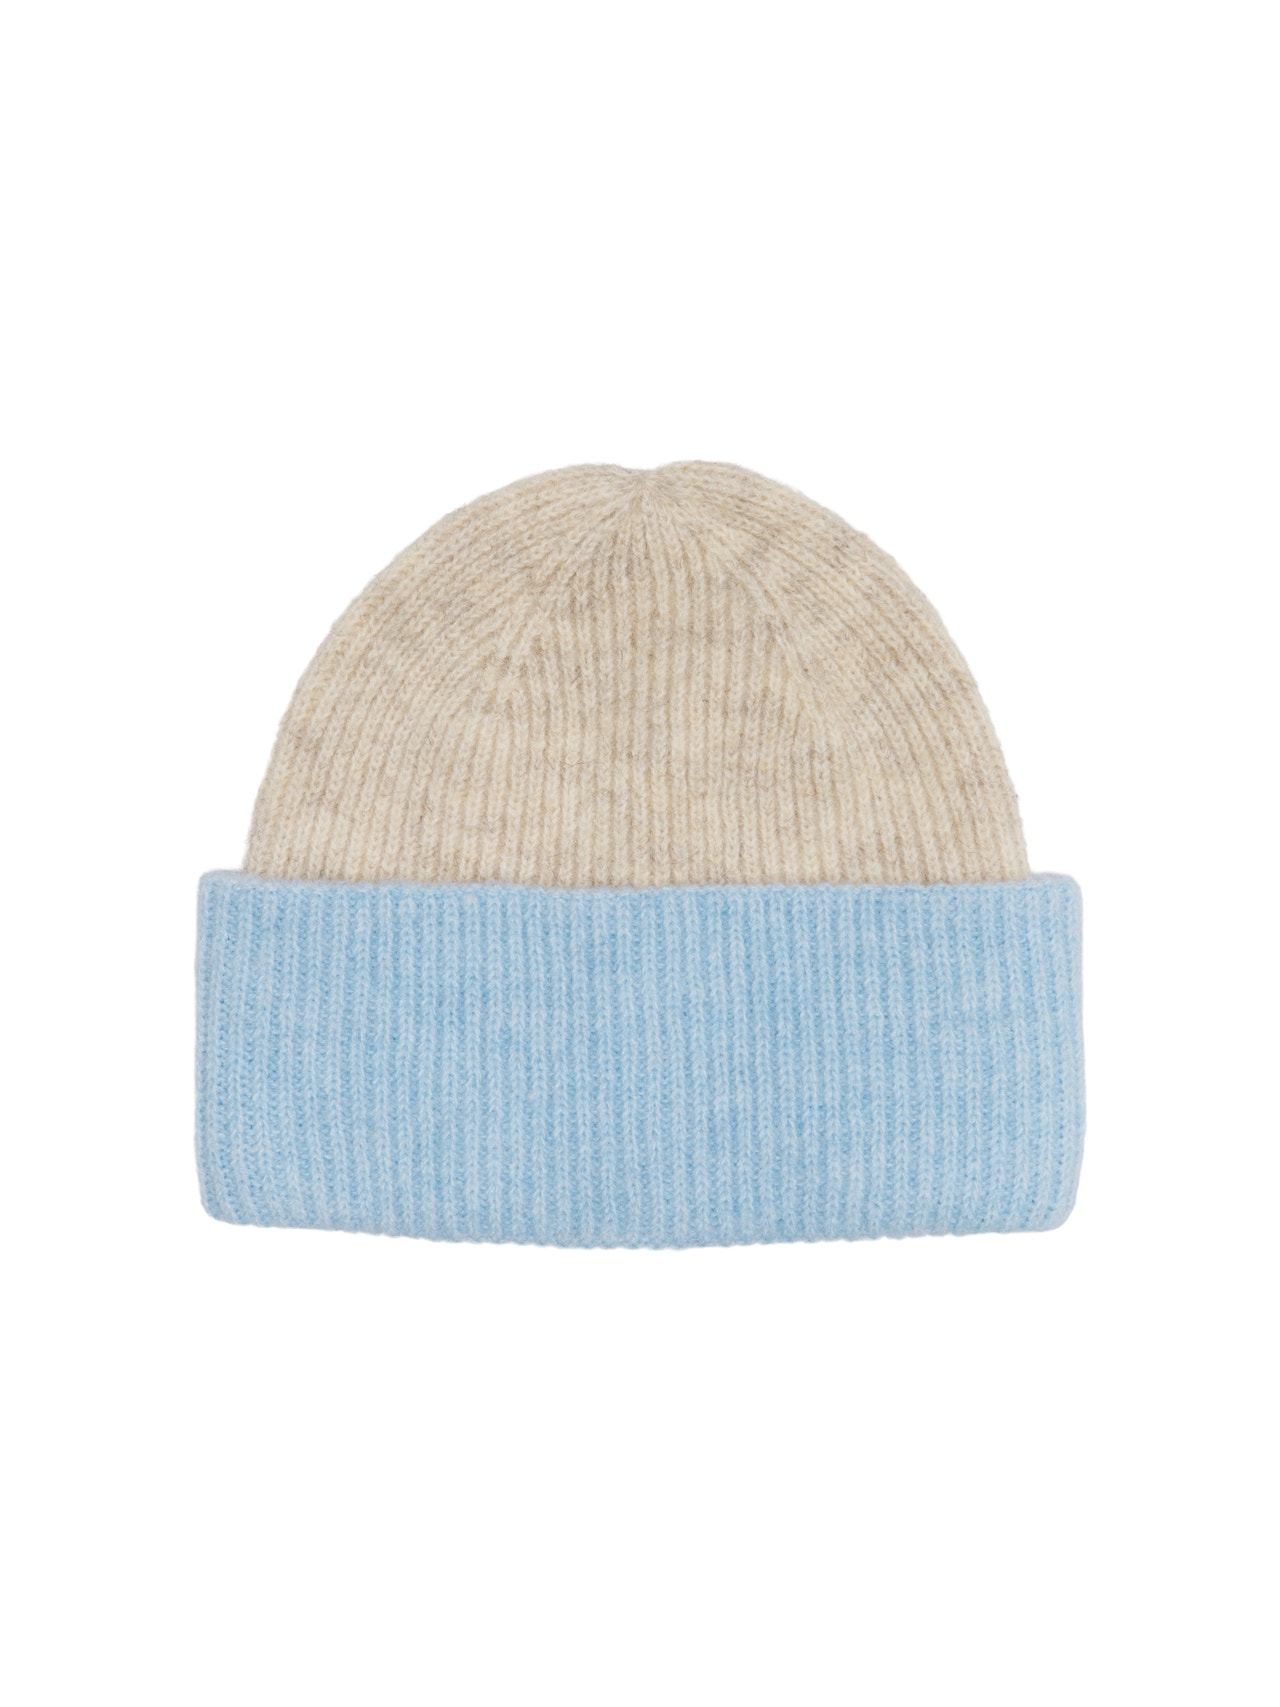 ONLY Rib knitted beanie -Pumice Stone - 15298507